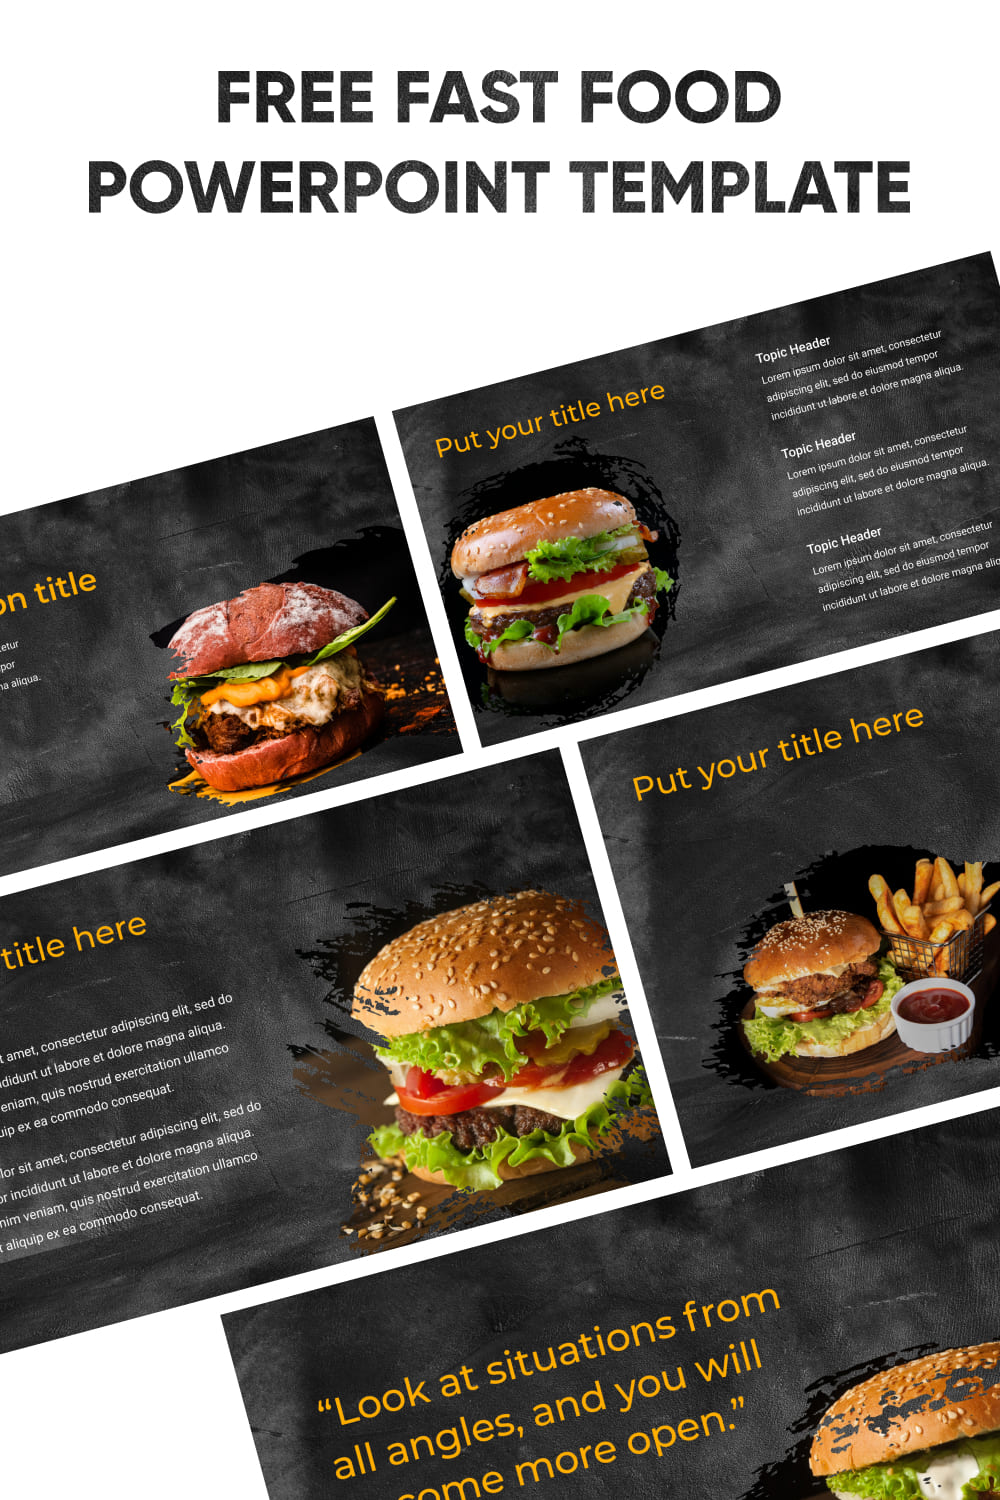 Pinterest Free Fast Food Powerpoint Template.